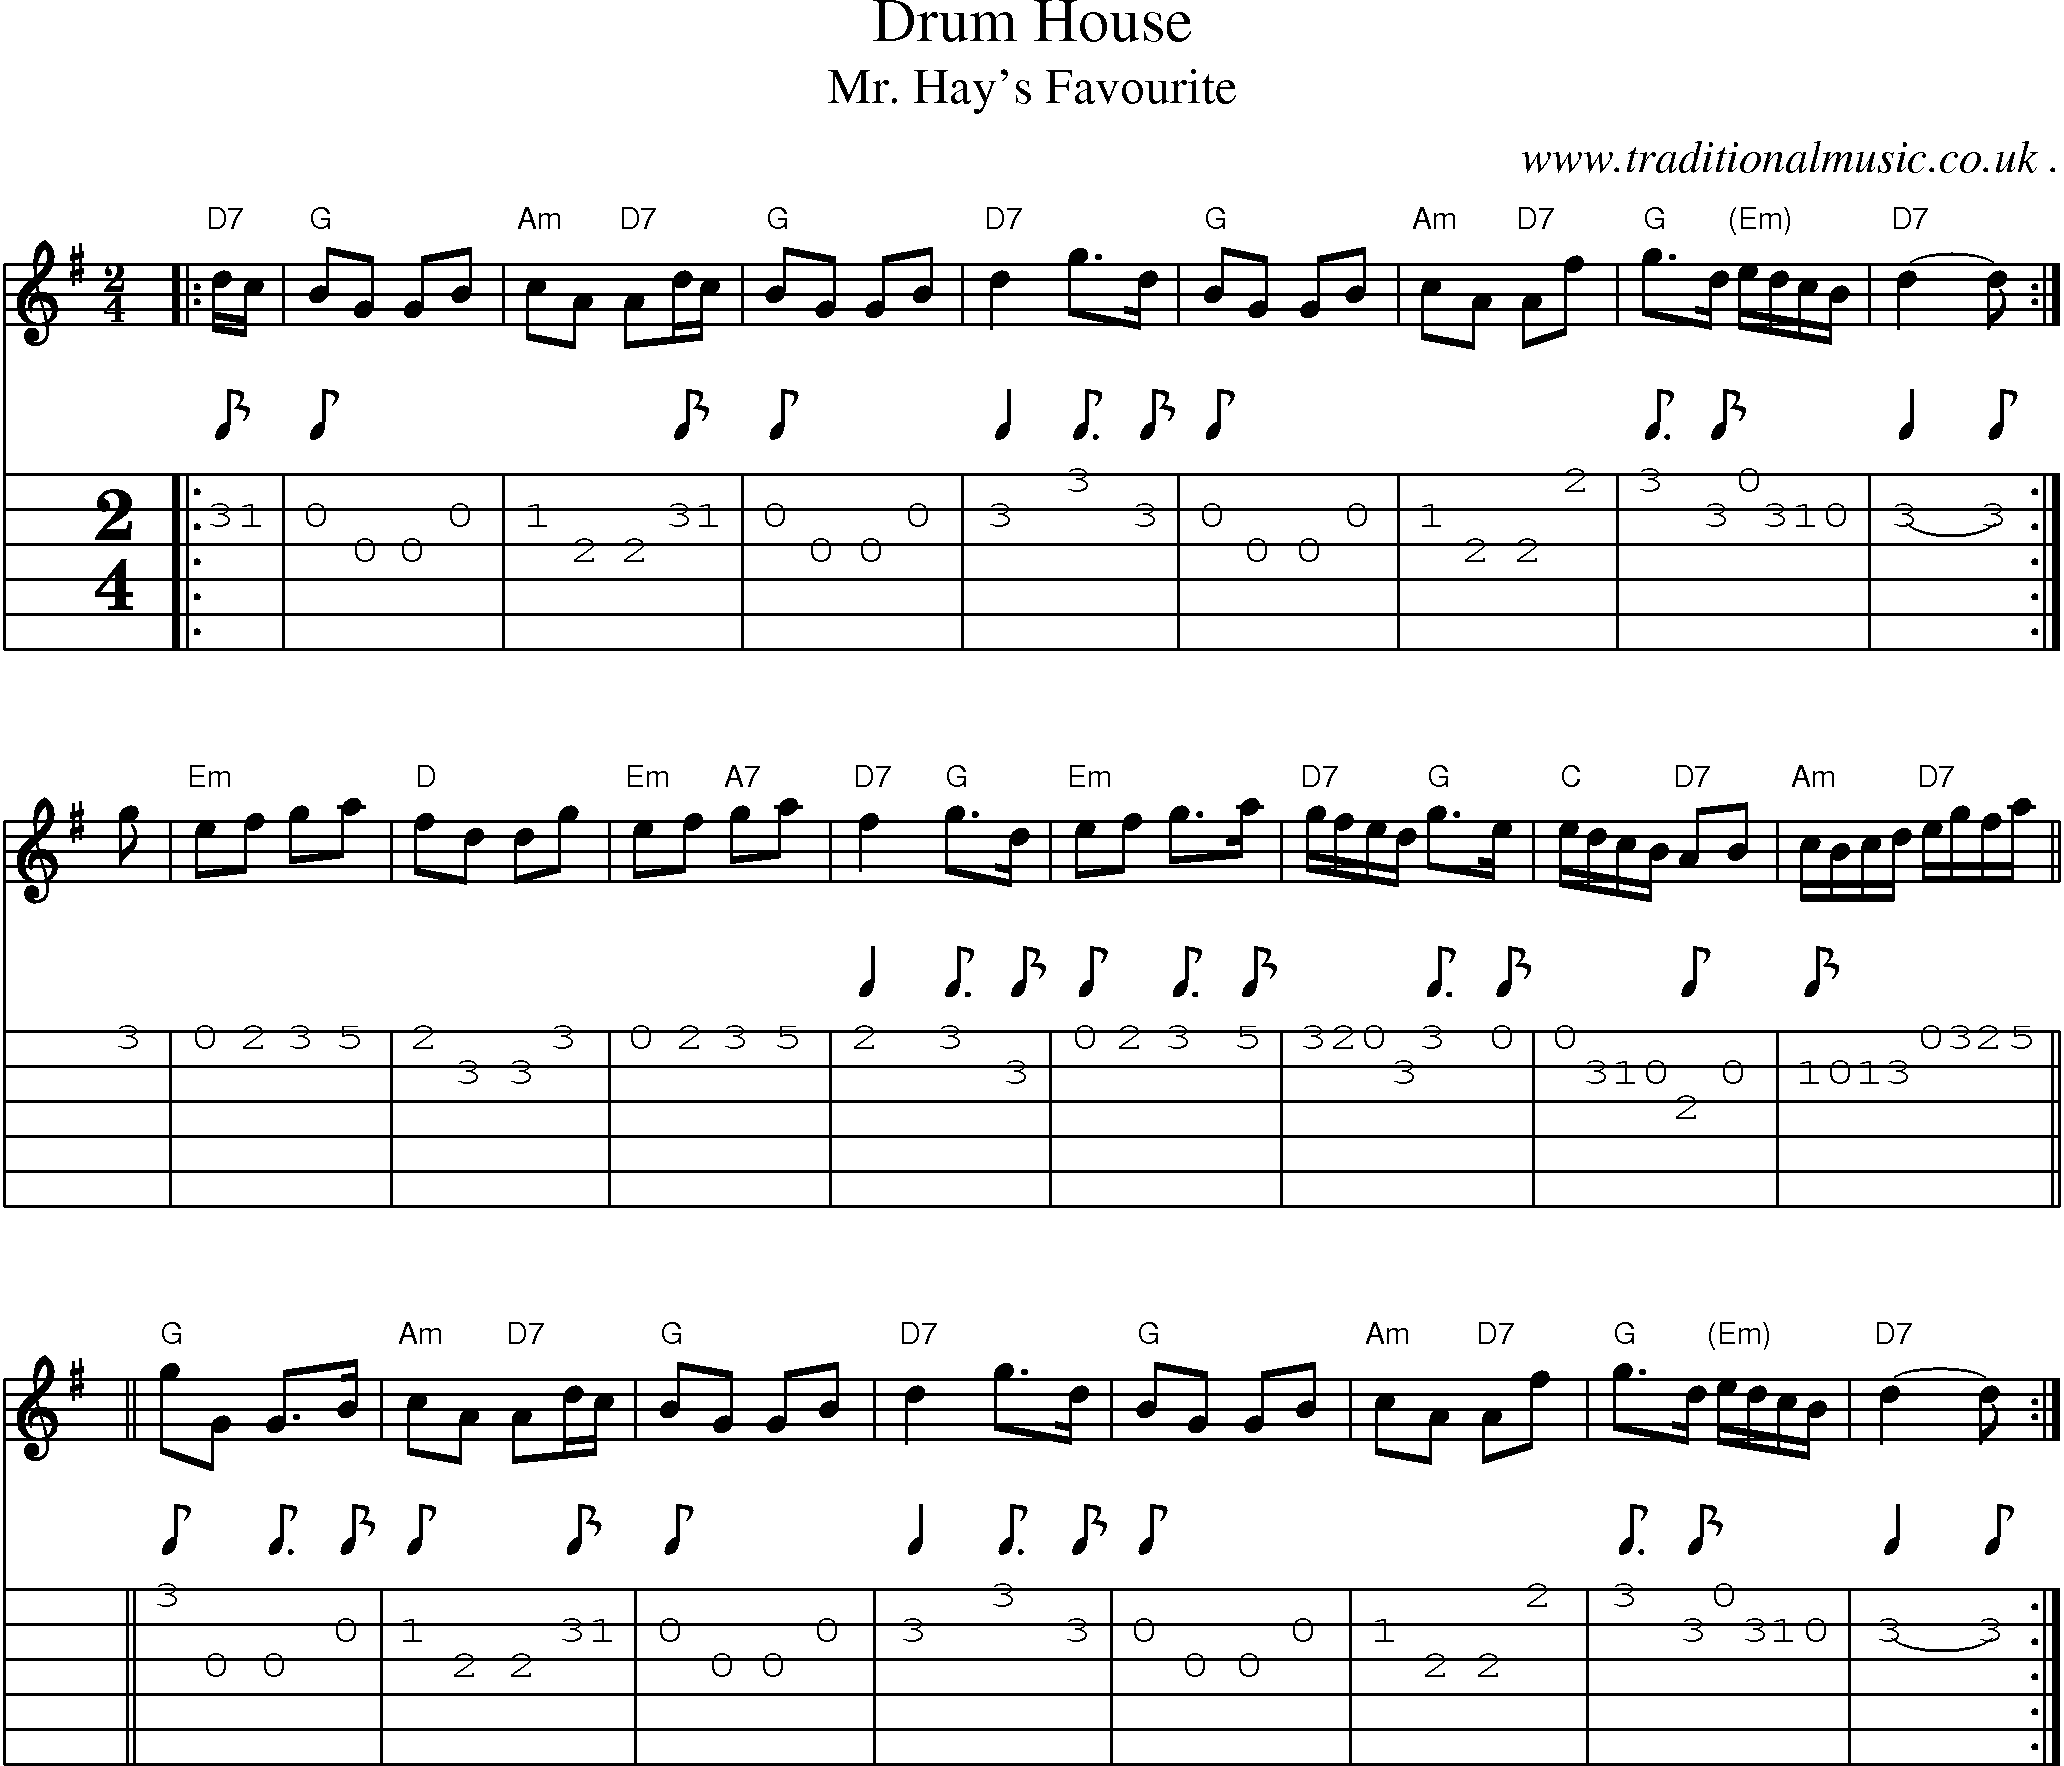 Sheet-music  score, Chords and Guitar Tabs for Drum House